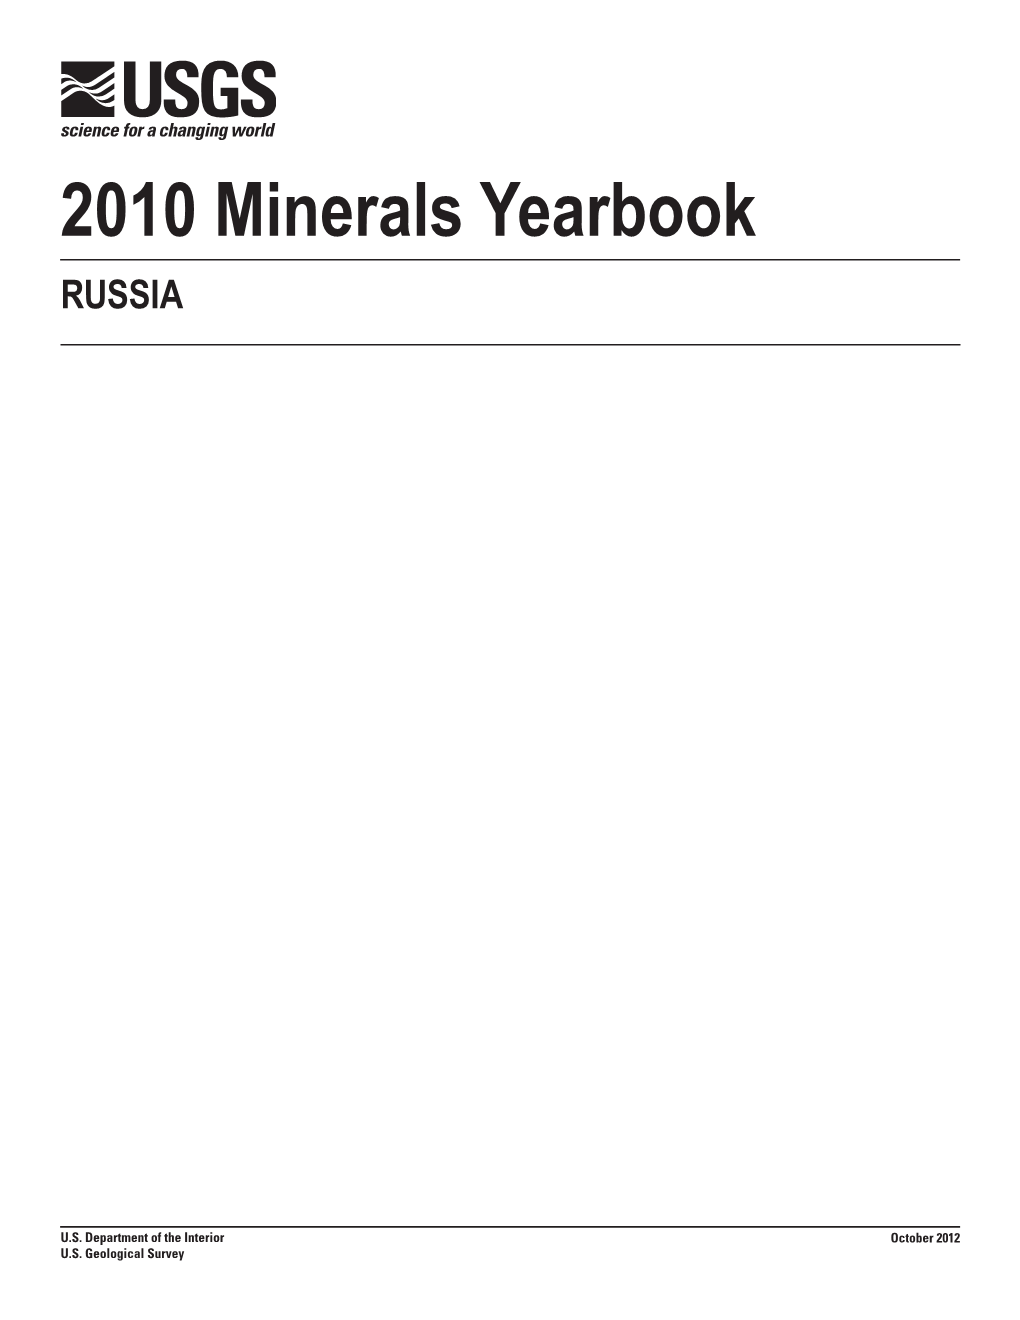 The Mineral Industry of Russia in 2010